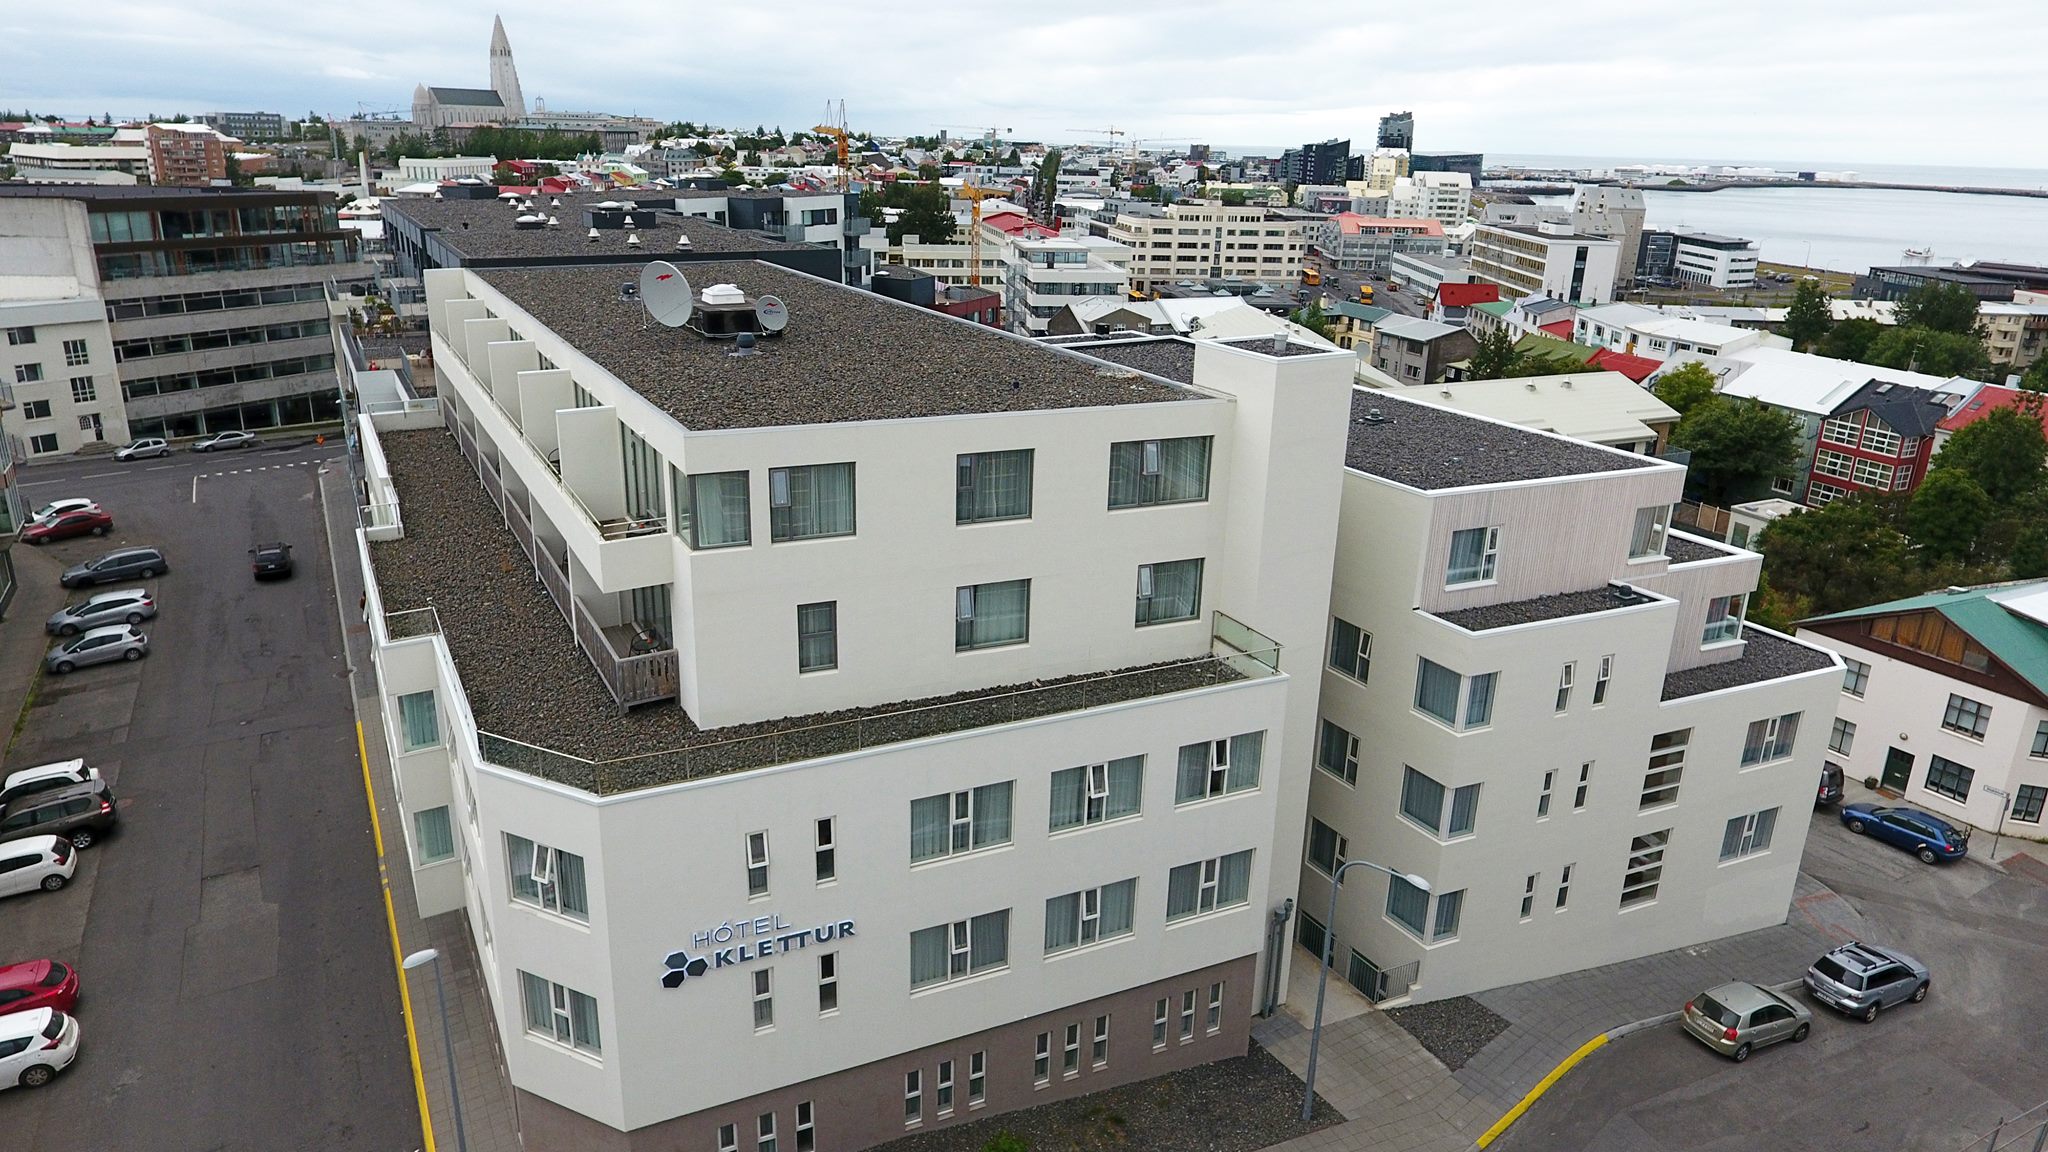 Where to Stay in Reykjavik | Guide to Iceland